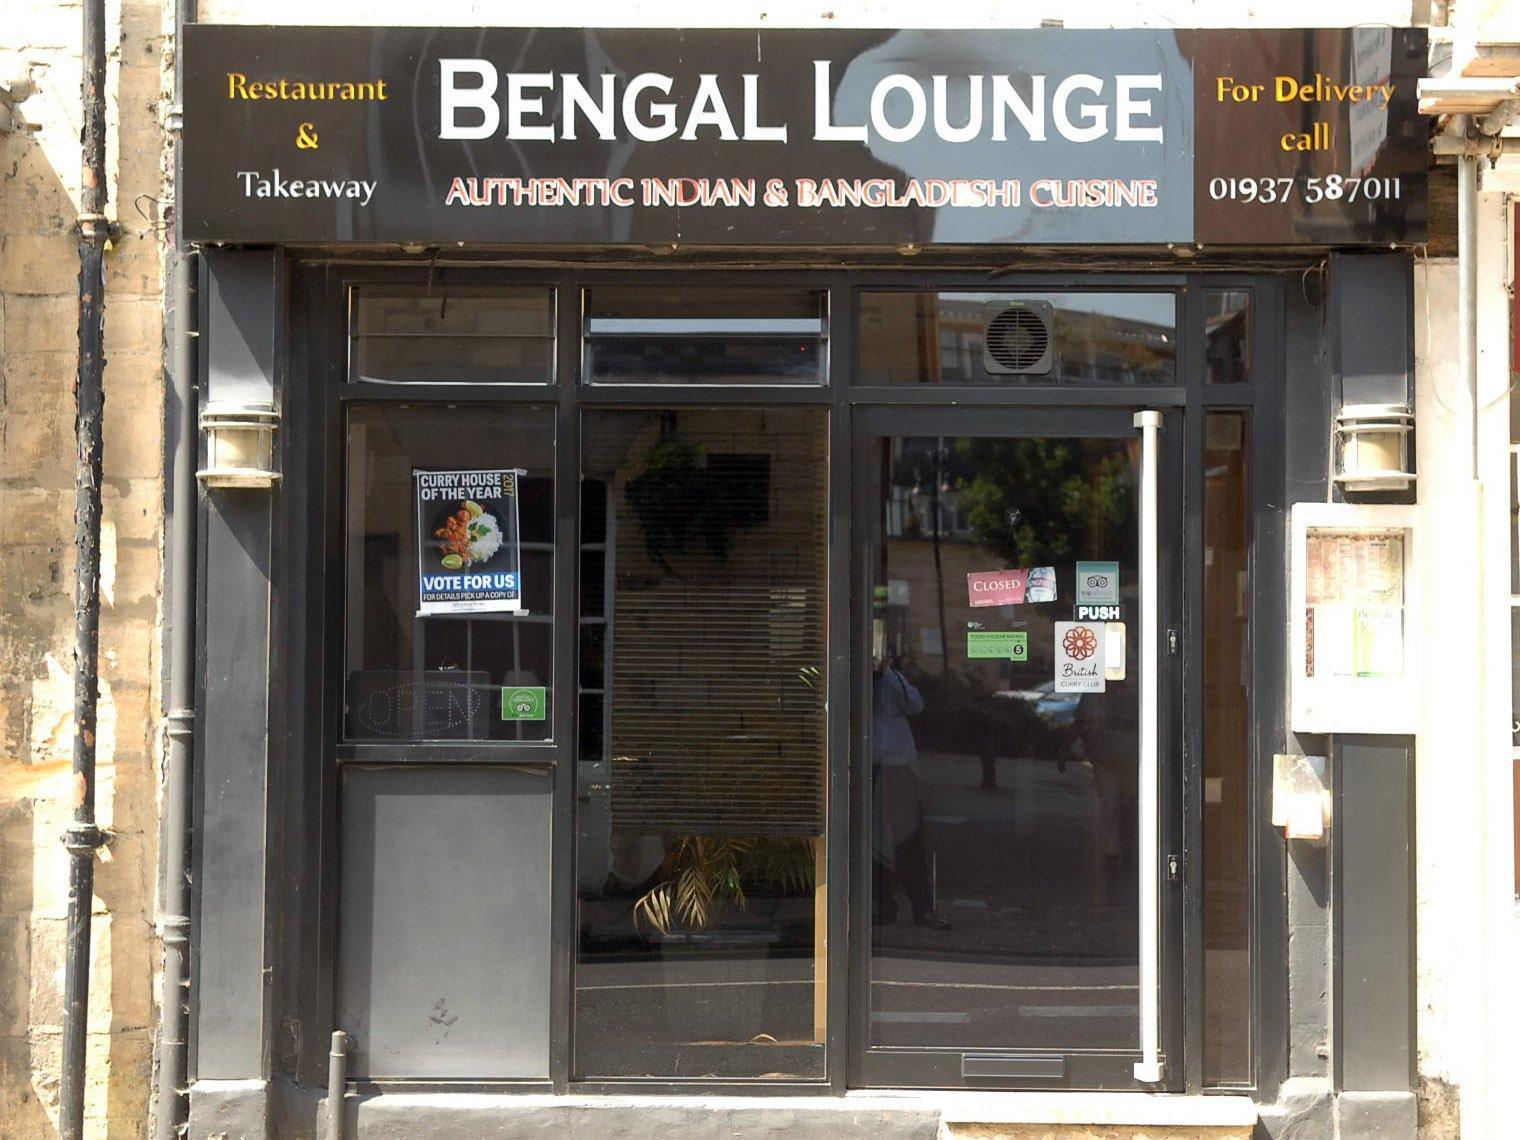 A favourite on Wetherby High Street for takeaways, this restaurant was praised for its extensive and authentic Indian menu